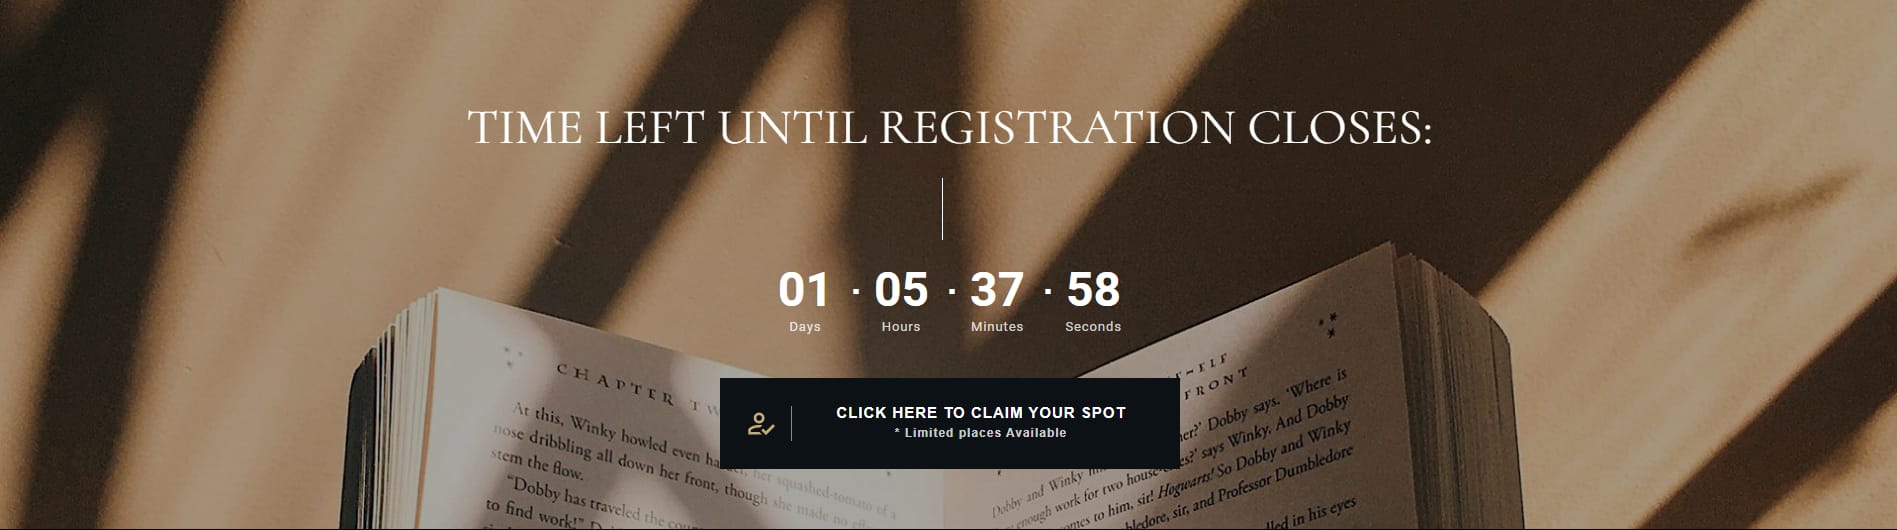 Snapshot of a countdown timer on a webinar page template in the Bookwise theme